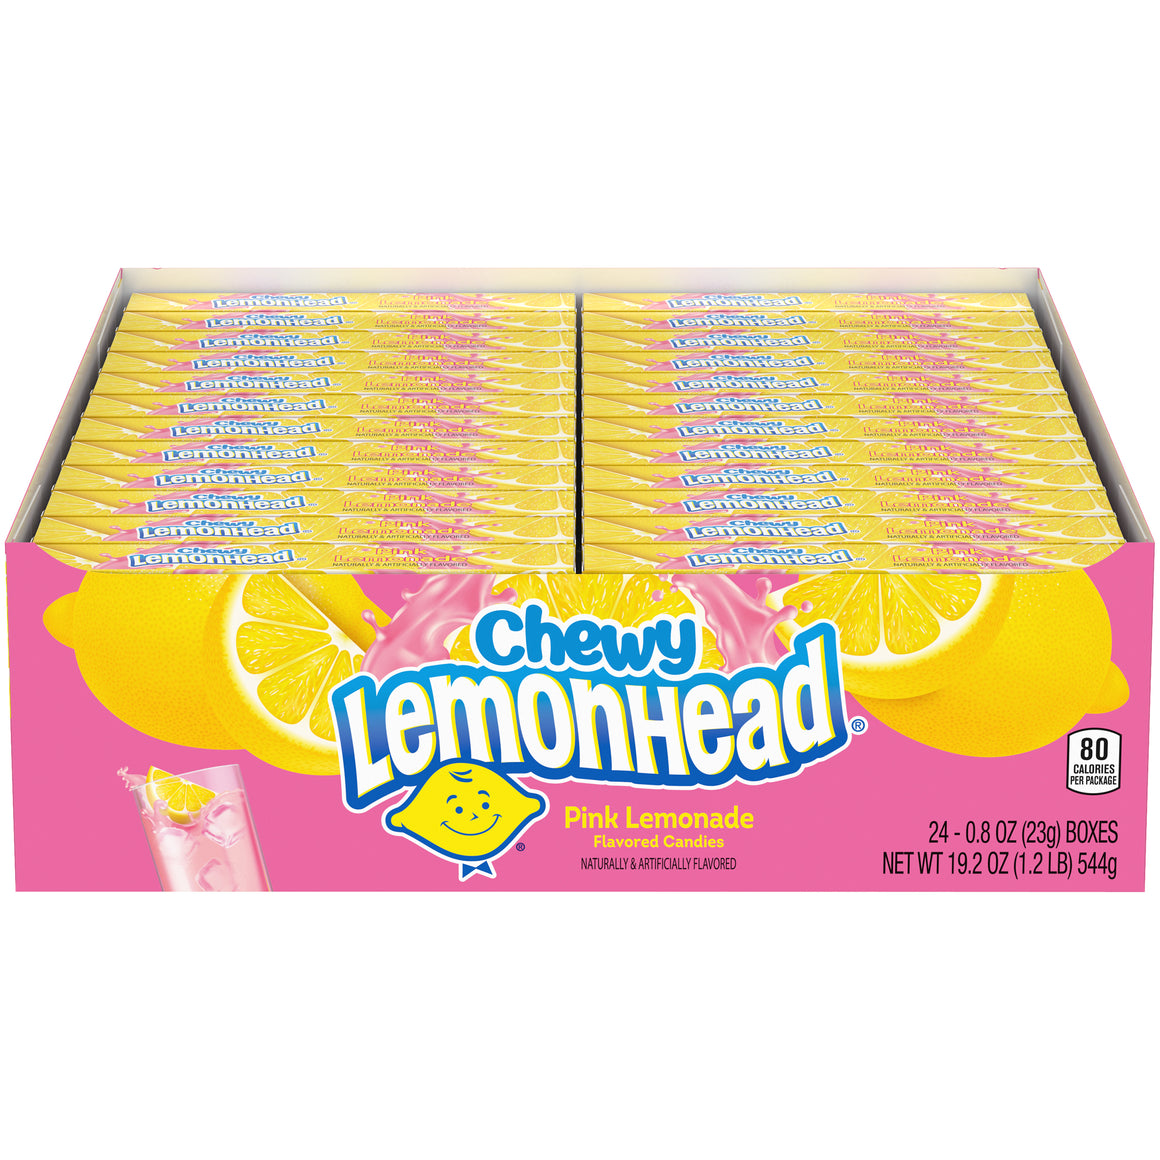 All City Candy Chewy Lemonhead Pink Lemonade Candy .8-oz. Box 1 Box Chewy Ferrara Candy Company For fresh candy and great service, visit www.allcitycandy.com